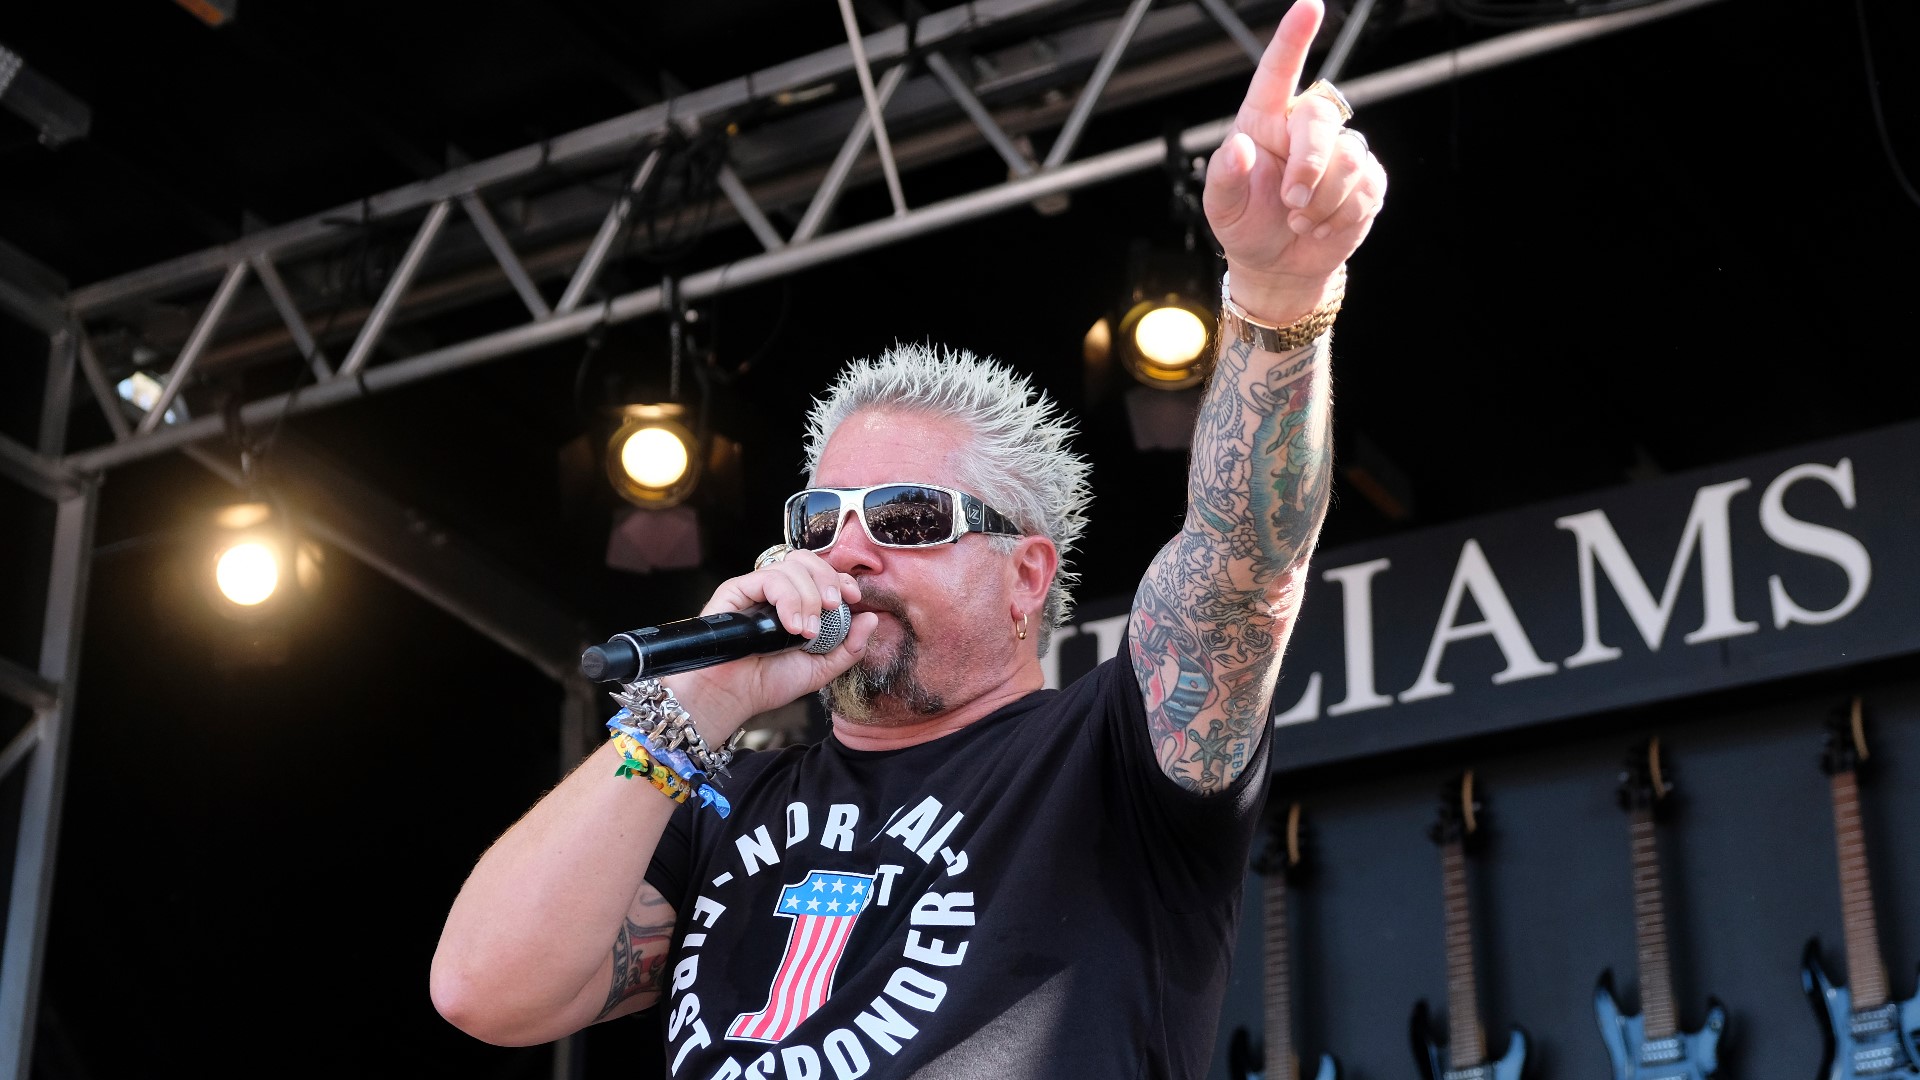 Fieri’s new restaurant will be located at Eldorado Scioto Downs, just 15 minutes south of downtown Columbus.